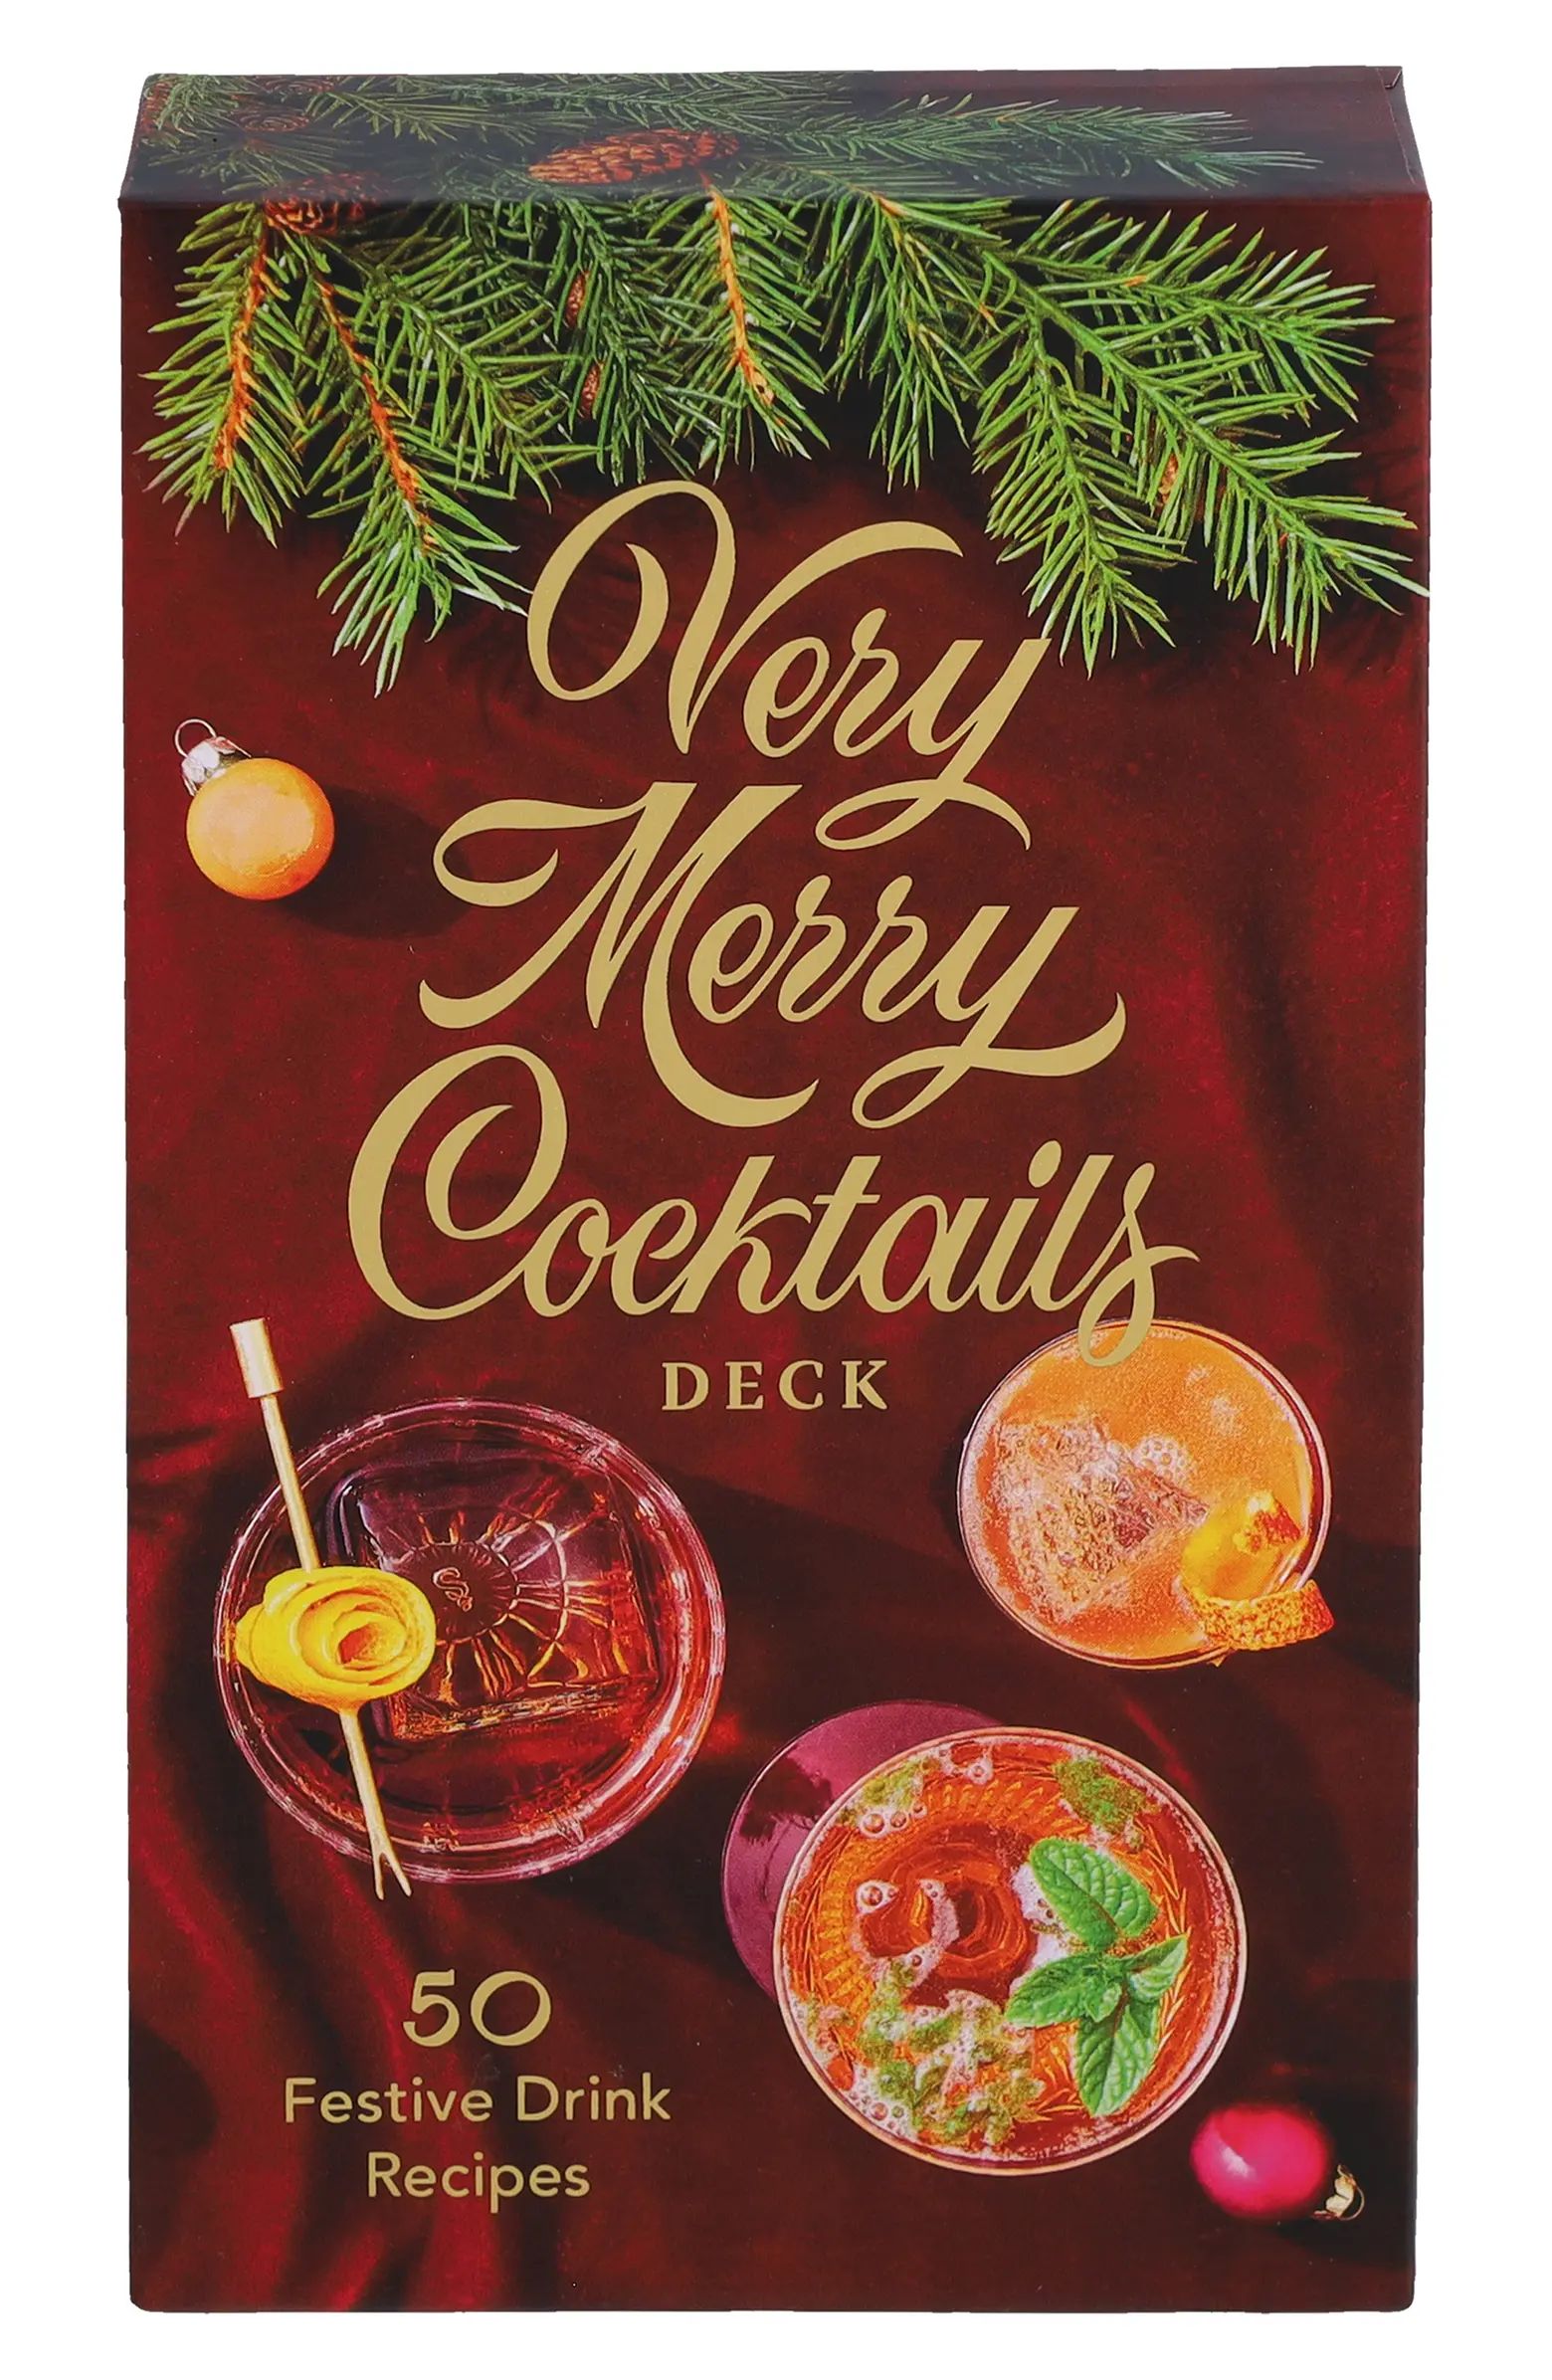 Chronicle Books 'Very Merry Cocktails' Deck | Nordstrom | Nordstrom